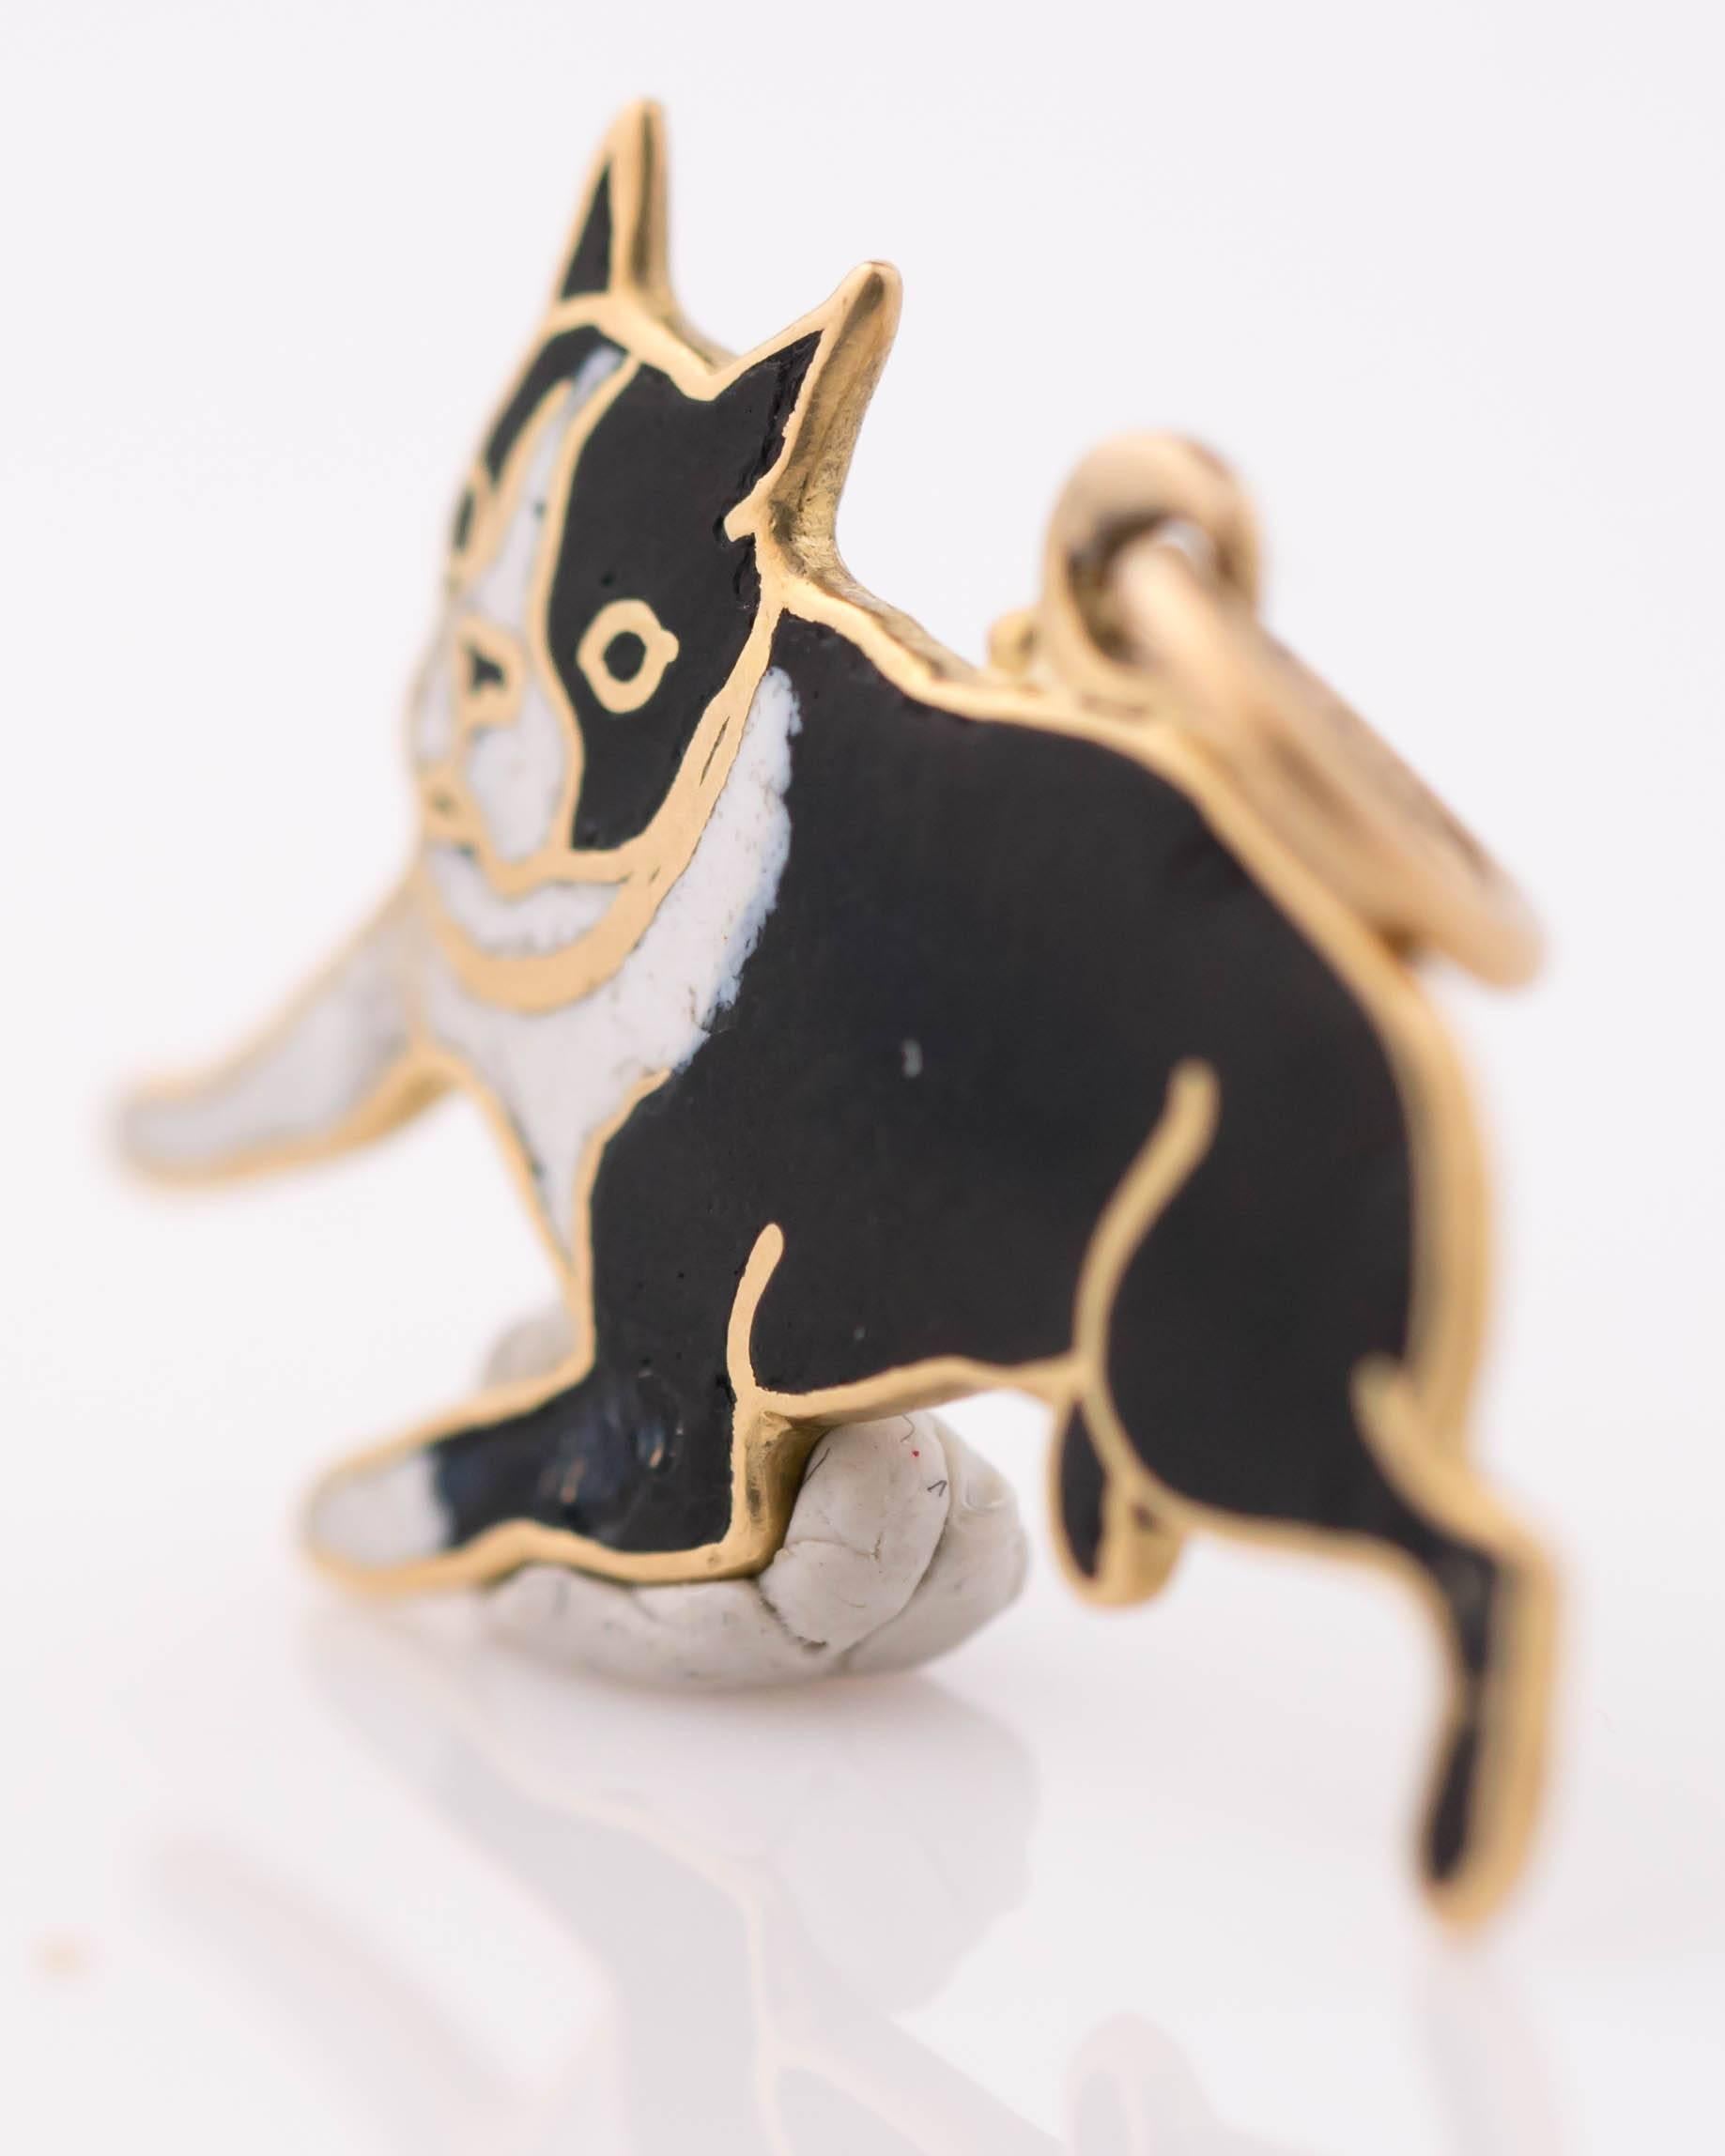 1950s Boston Terrier Dog Charm Pendant - 14 Karat Yellow Gold, Enamel Cloisonne

Features Beautifully Hand Detailed Gold Work over Black and White Enamel. This 14 Karat Gold charm depicts a sweet Boston Terrier in repose. Black Enamel covers the